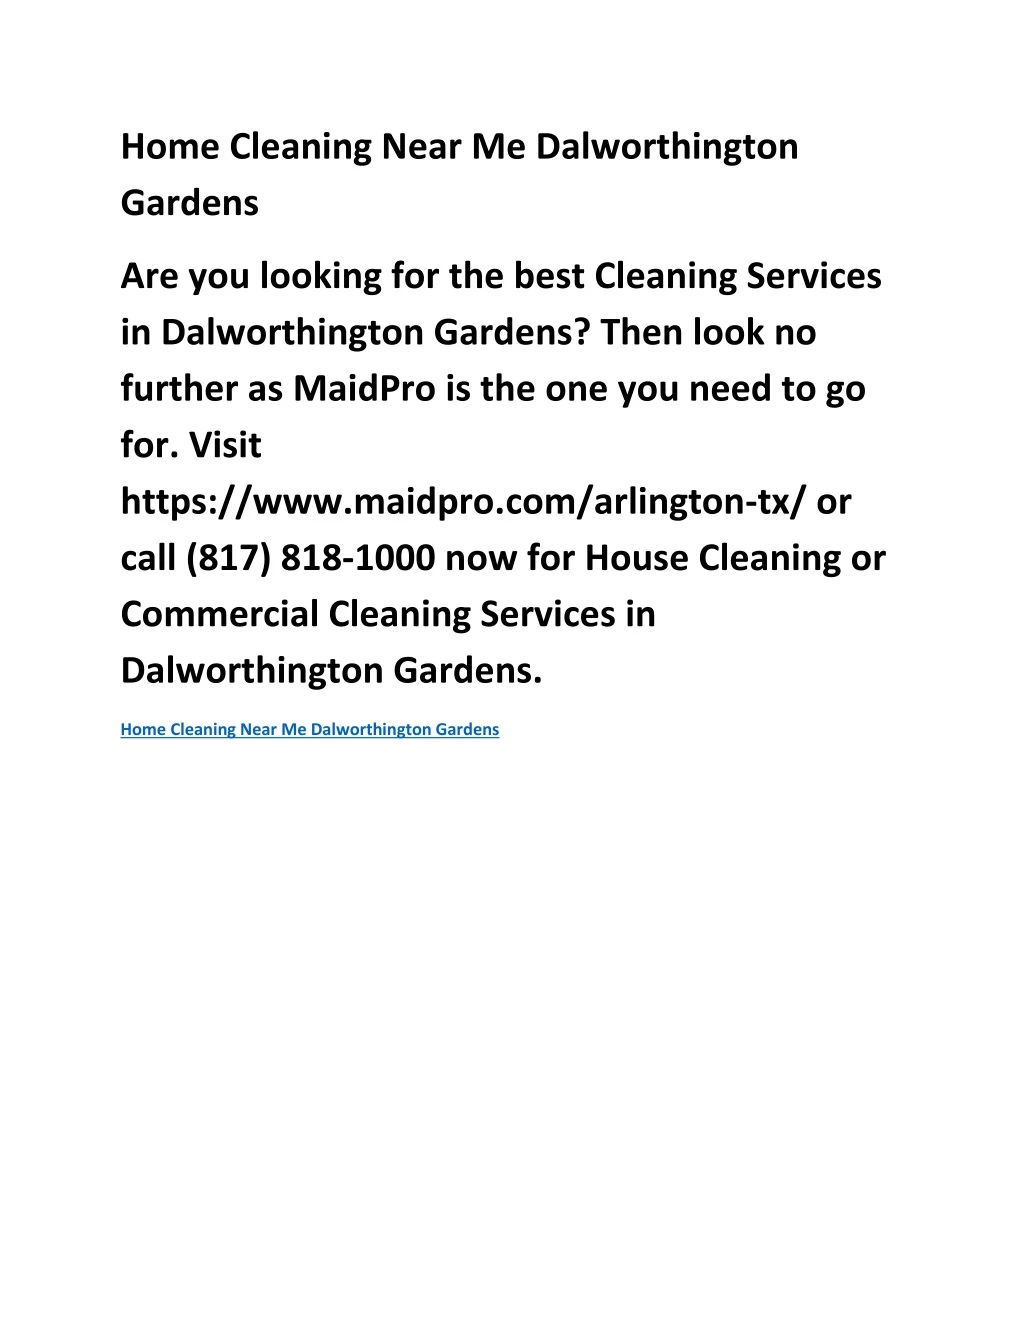 home cleaning near me dalworthington gardens